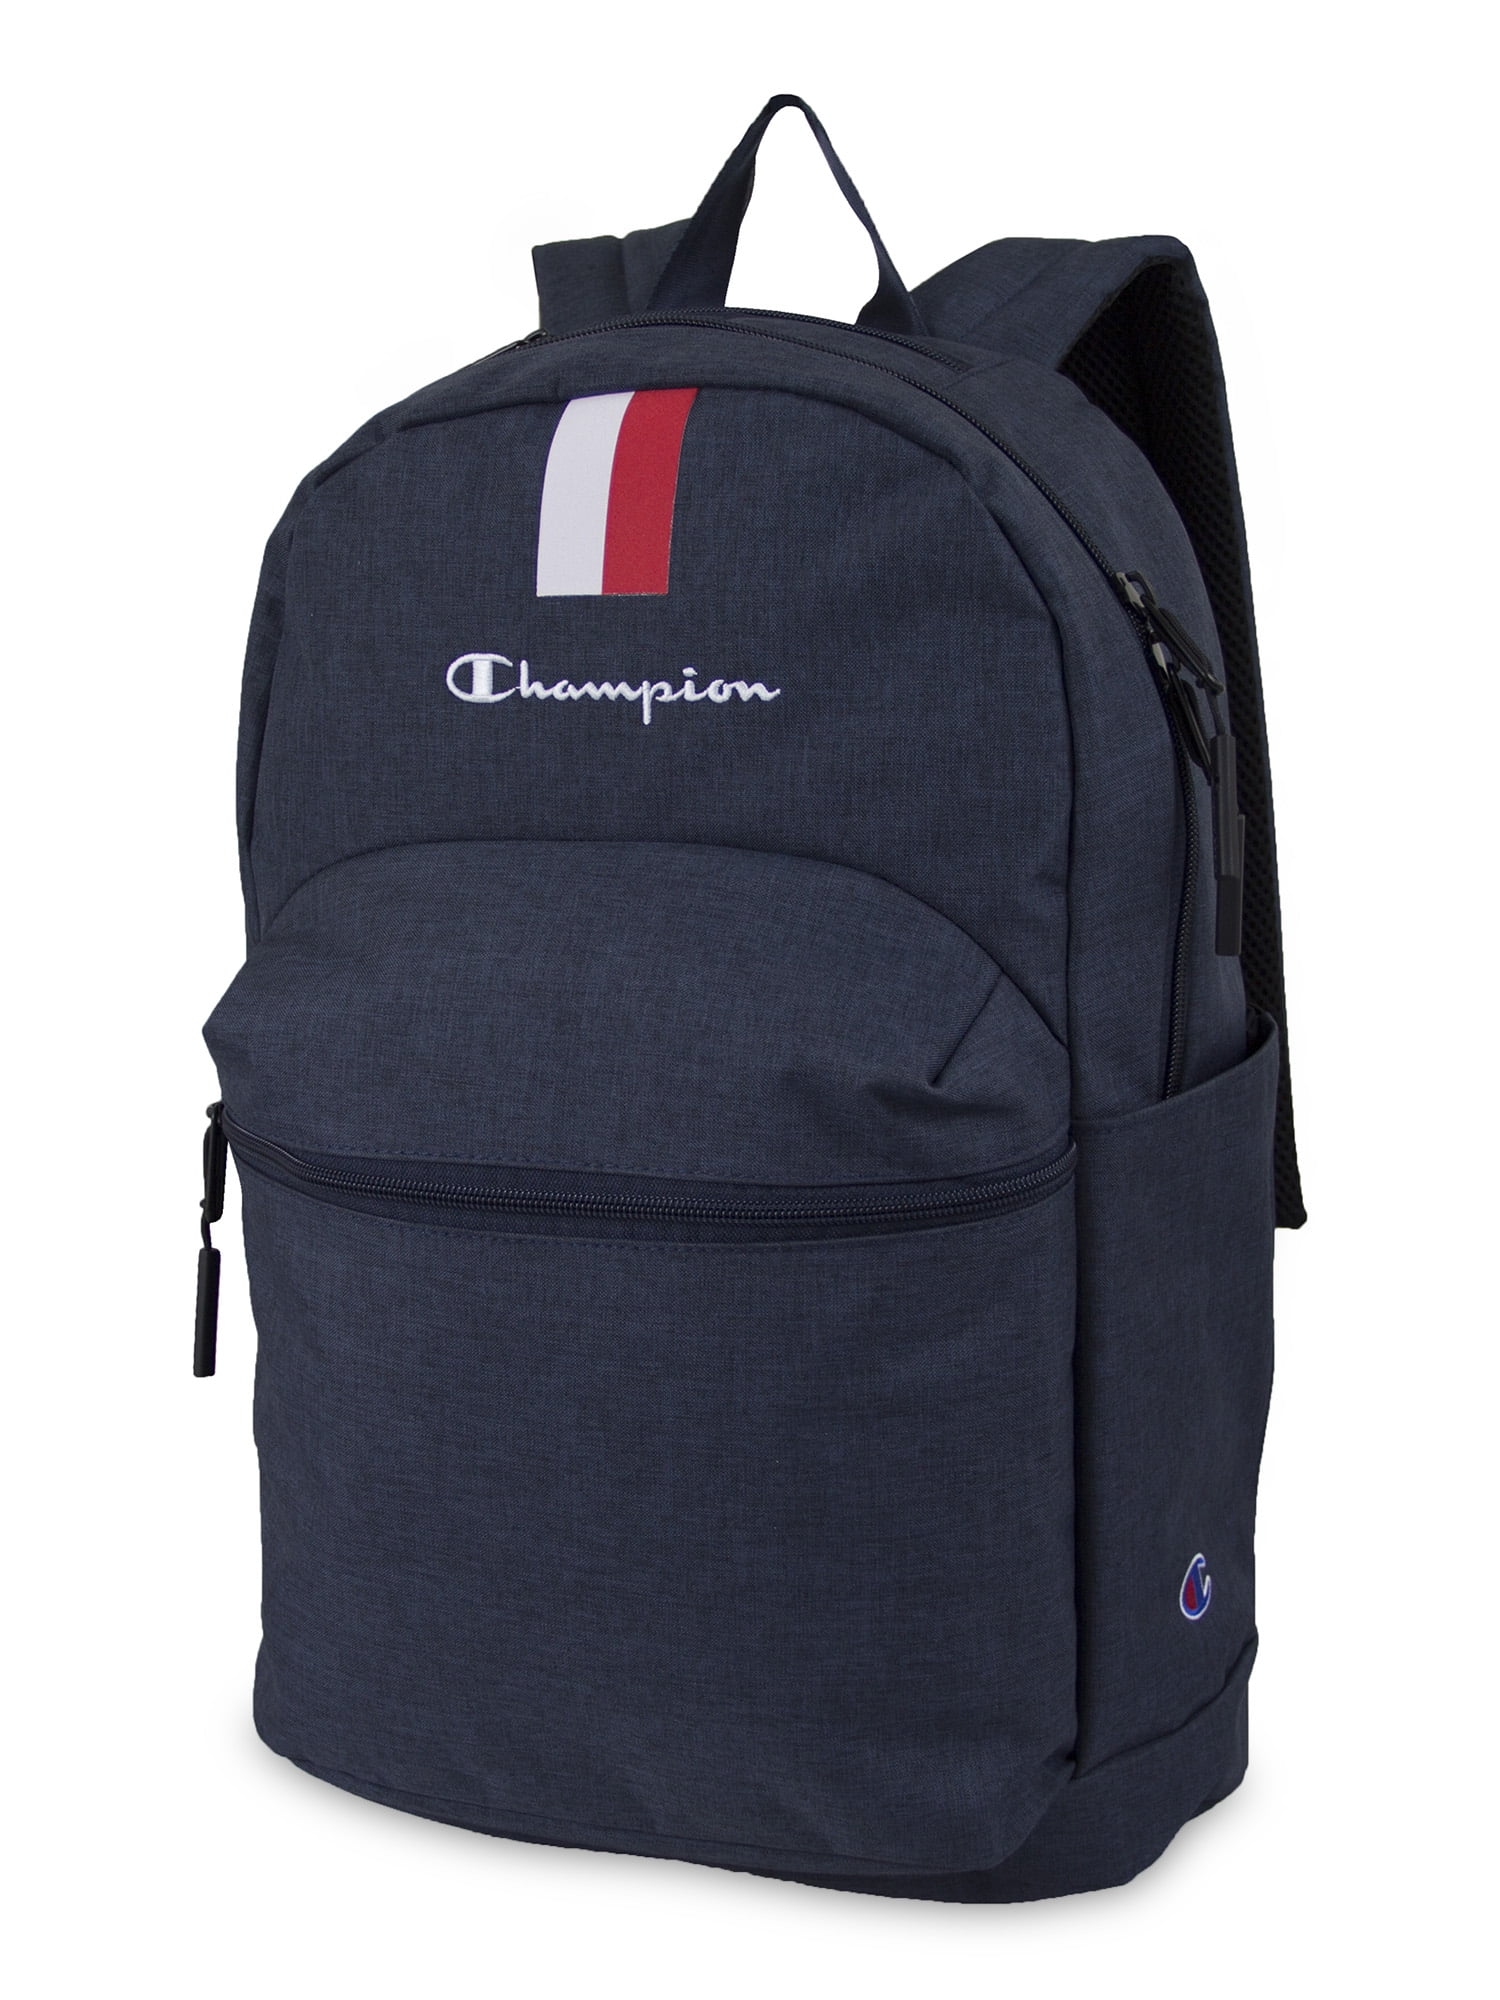 champion backpack navy blue